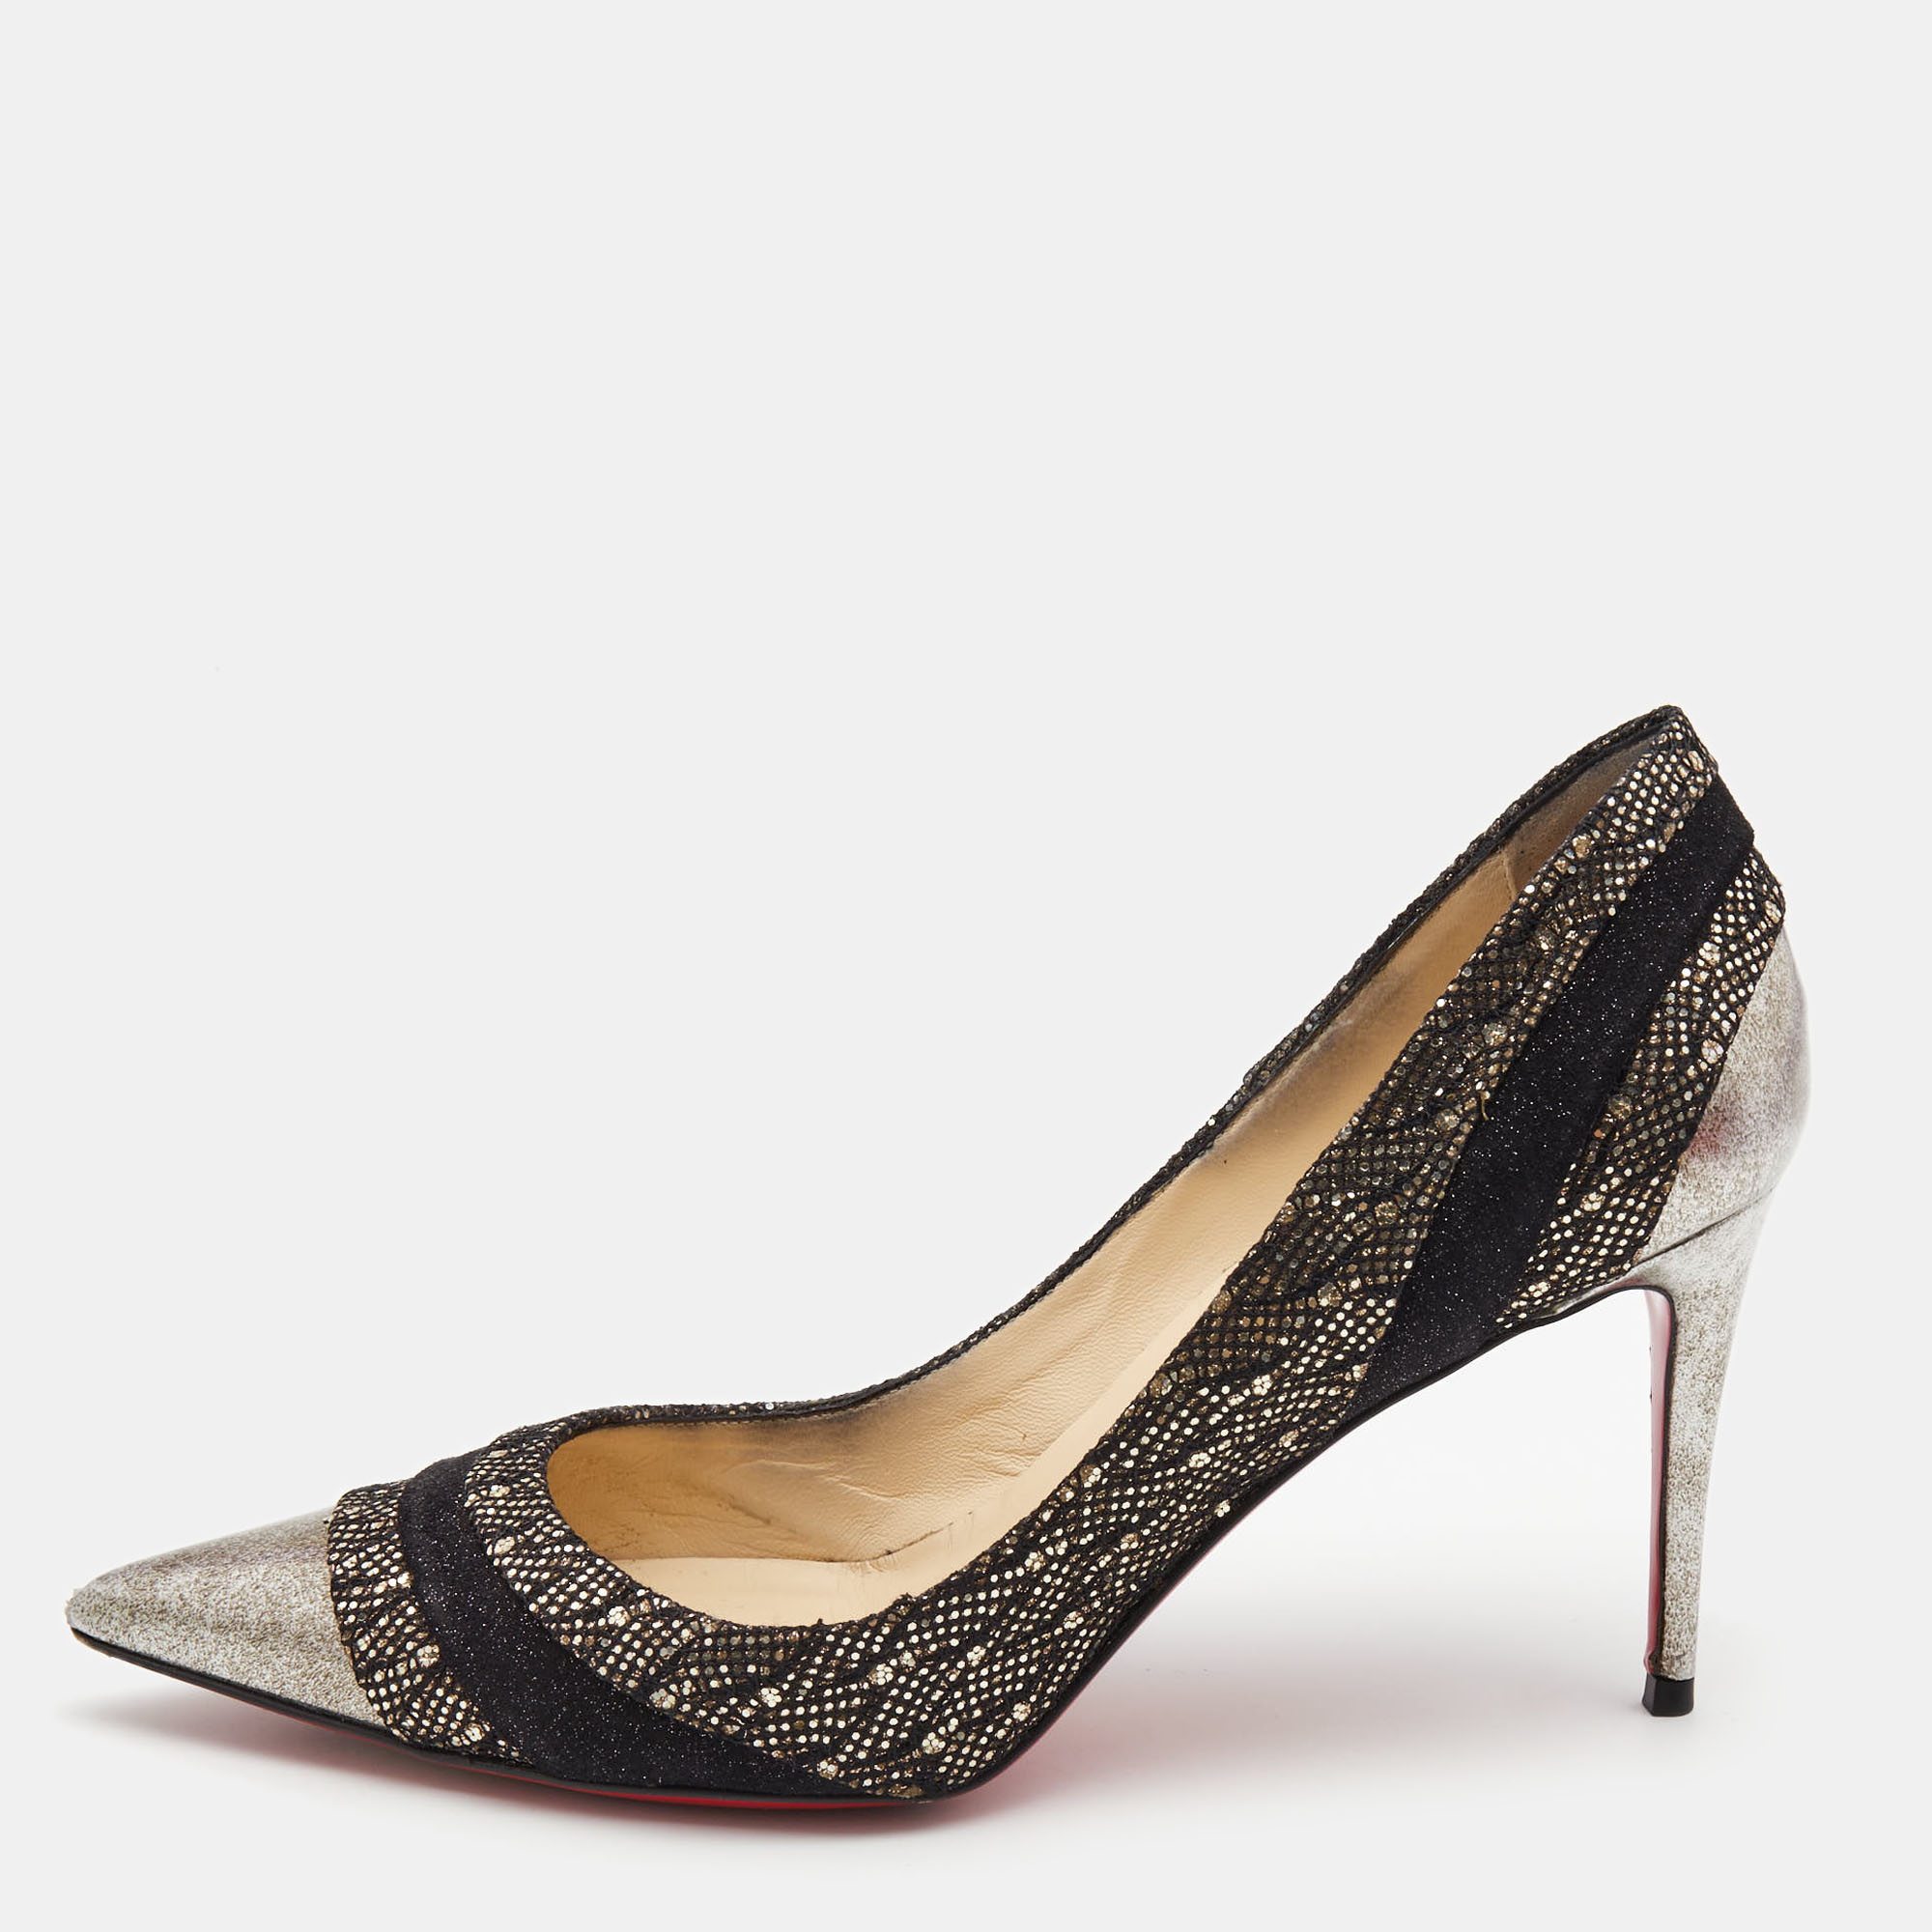 Christian Louboutin Two Tone Glitter Suede And Glitter Lace Eklectica Pumps Size 38.5